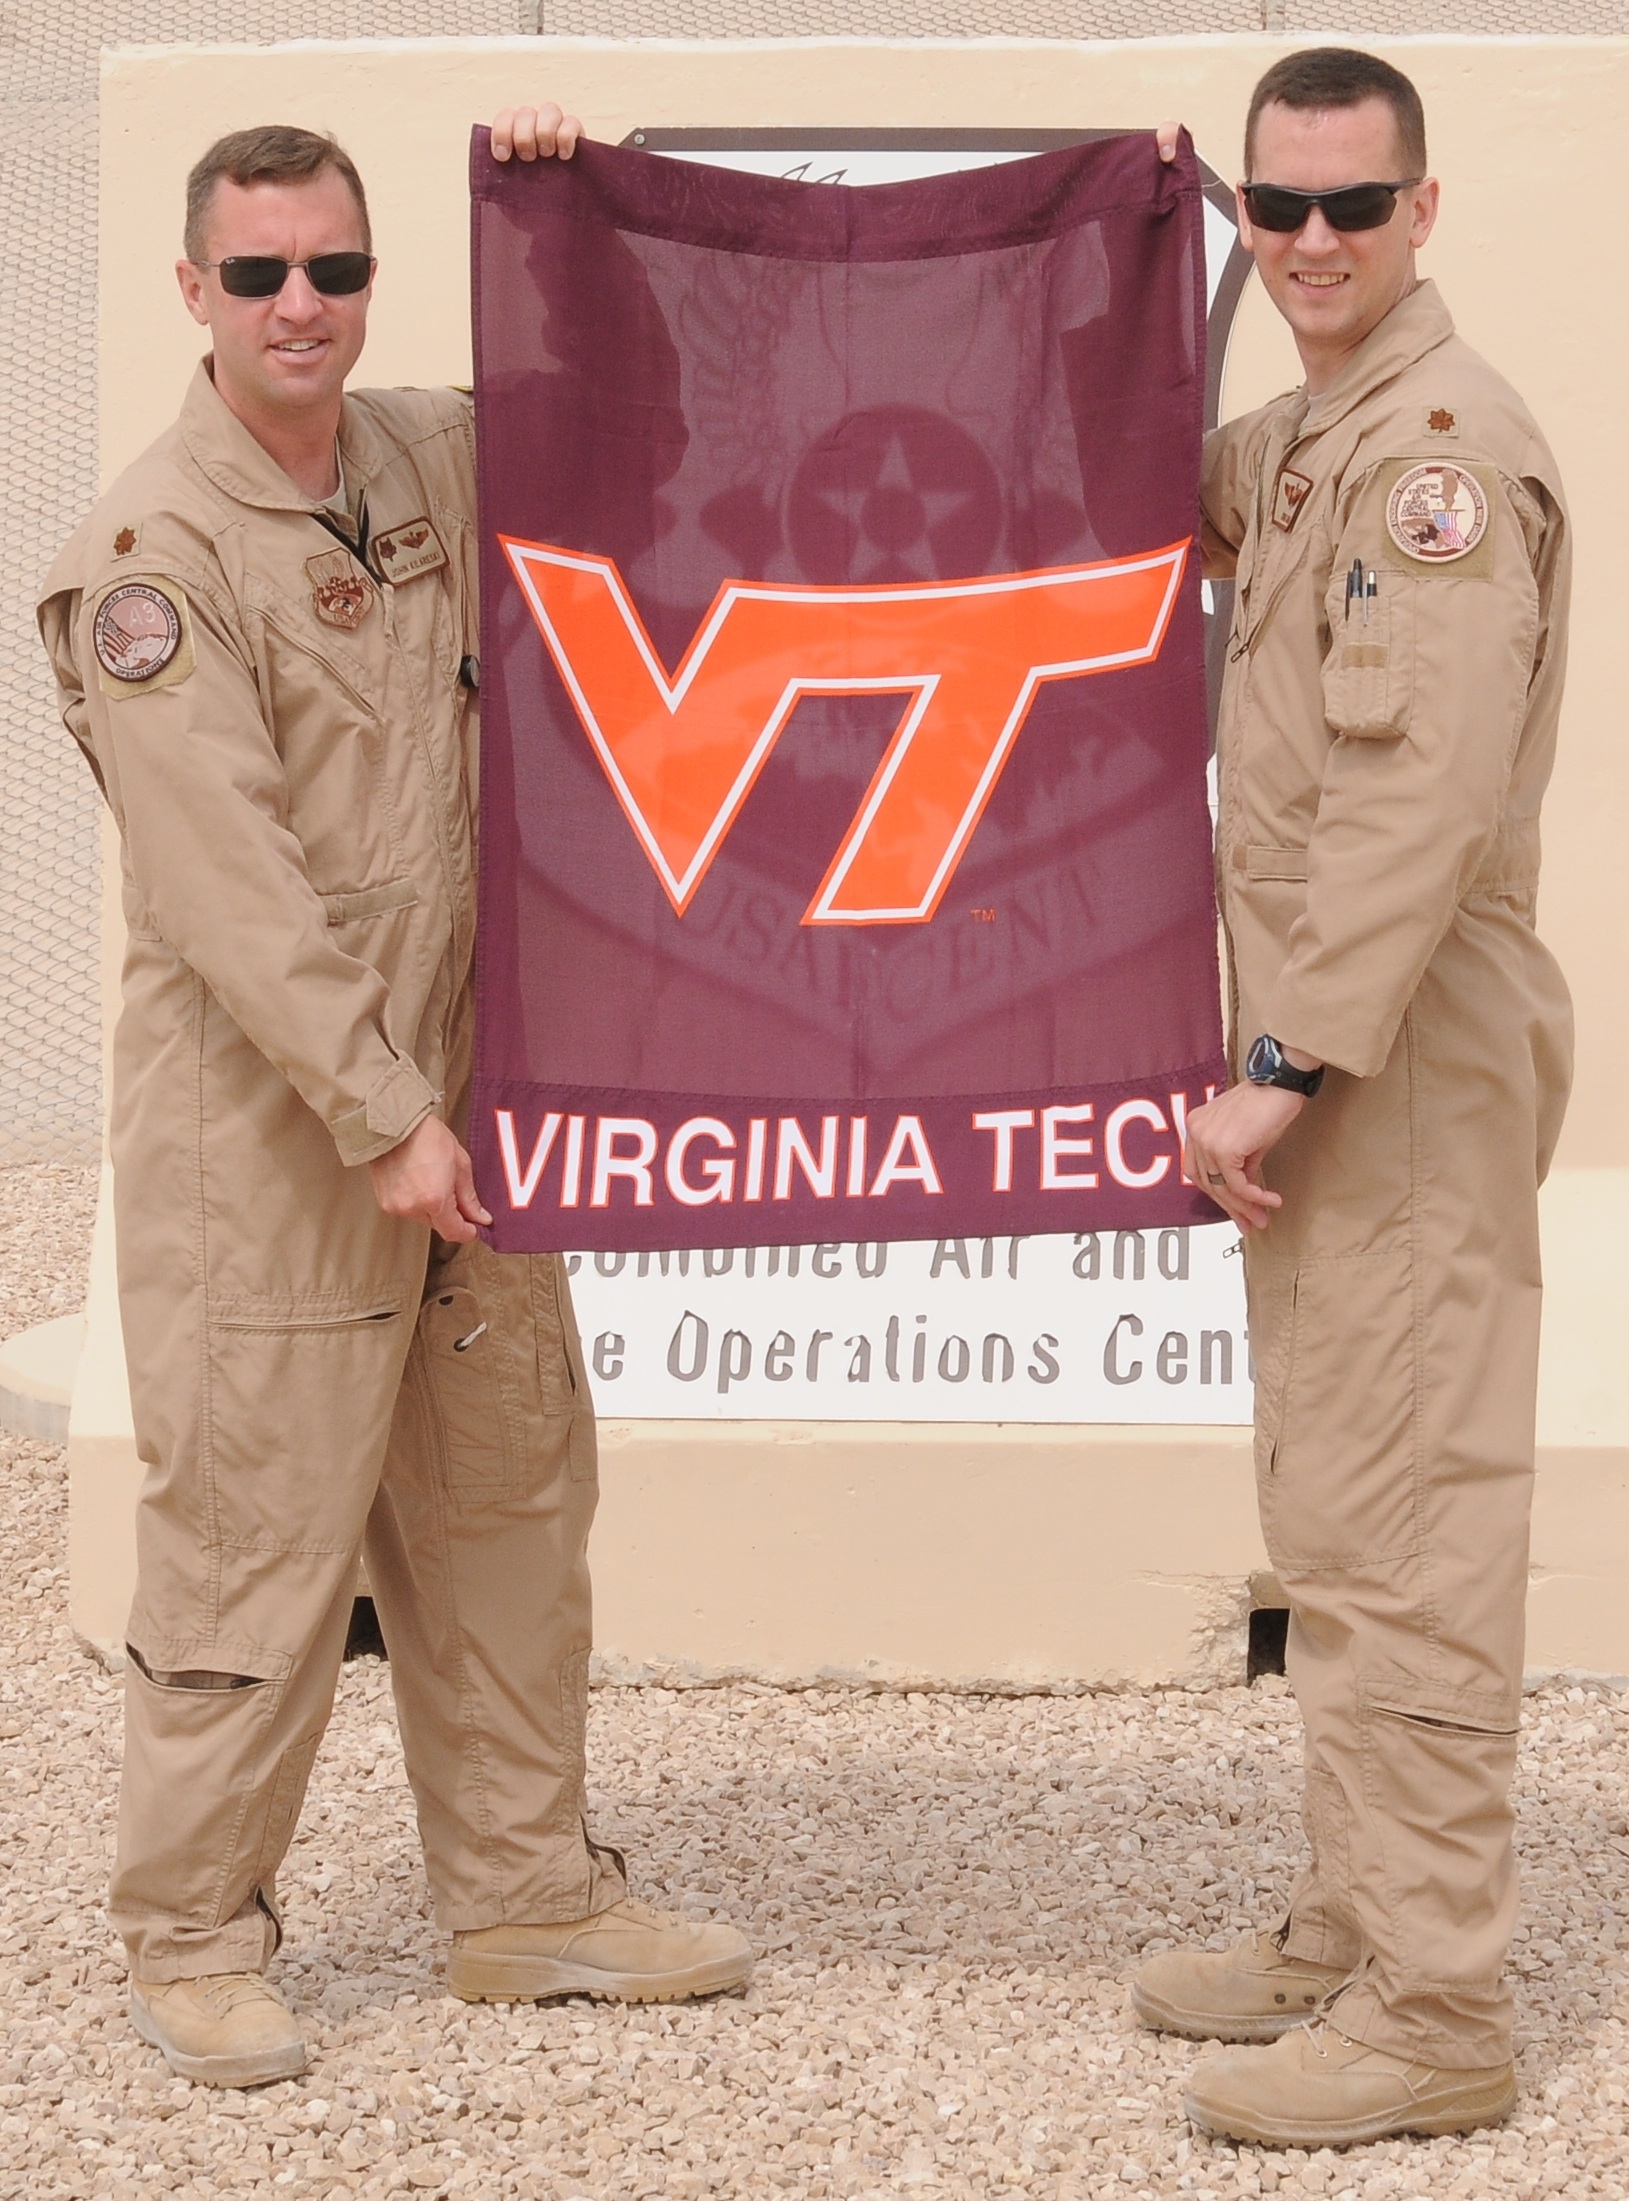 Maj. John Kilareski, U.S. Air Force, Virginia Tech Corps of Cadets Class of 1997 (left) and Capt. Chris Reid, U.S. Air Force, Virginia Tech Corps of Cadets Class of 2000 (right) in their deployed location.